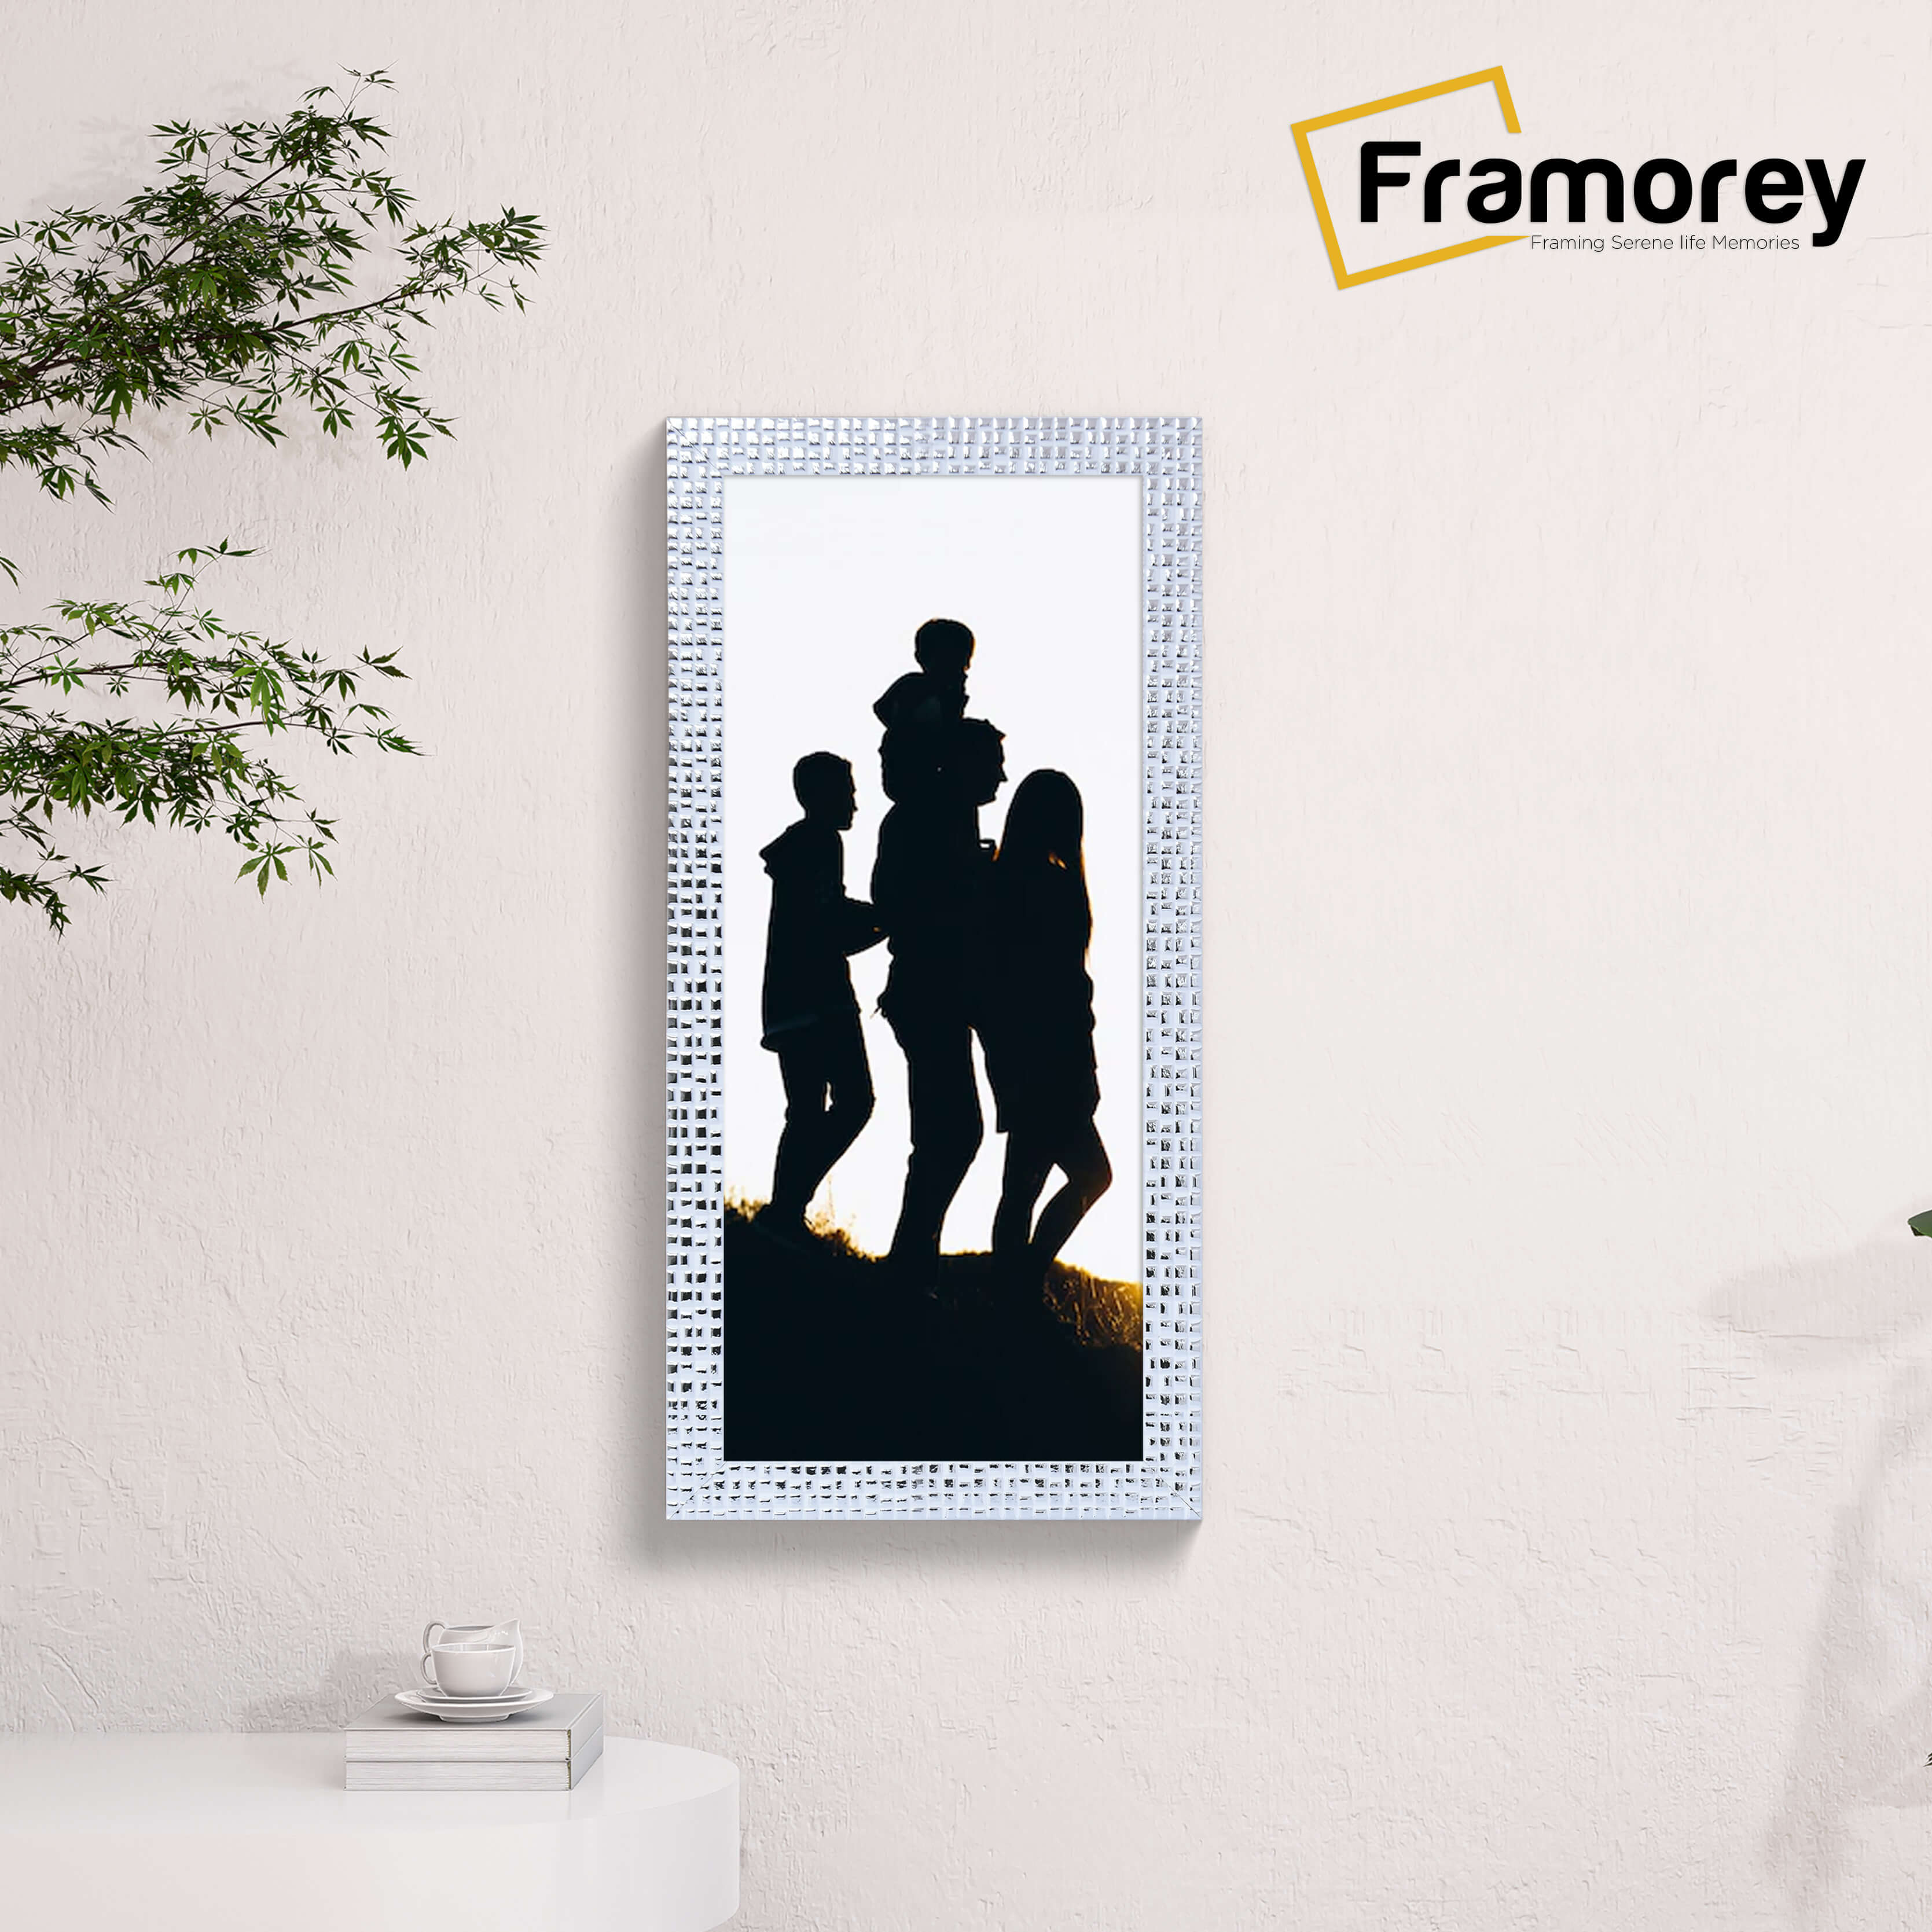 Panoramic Size White Picture Frame Photo Frame Rockstar Wall Art Frame